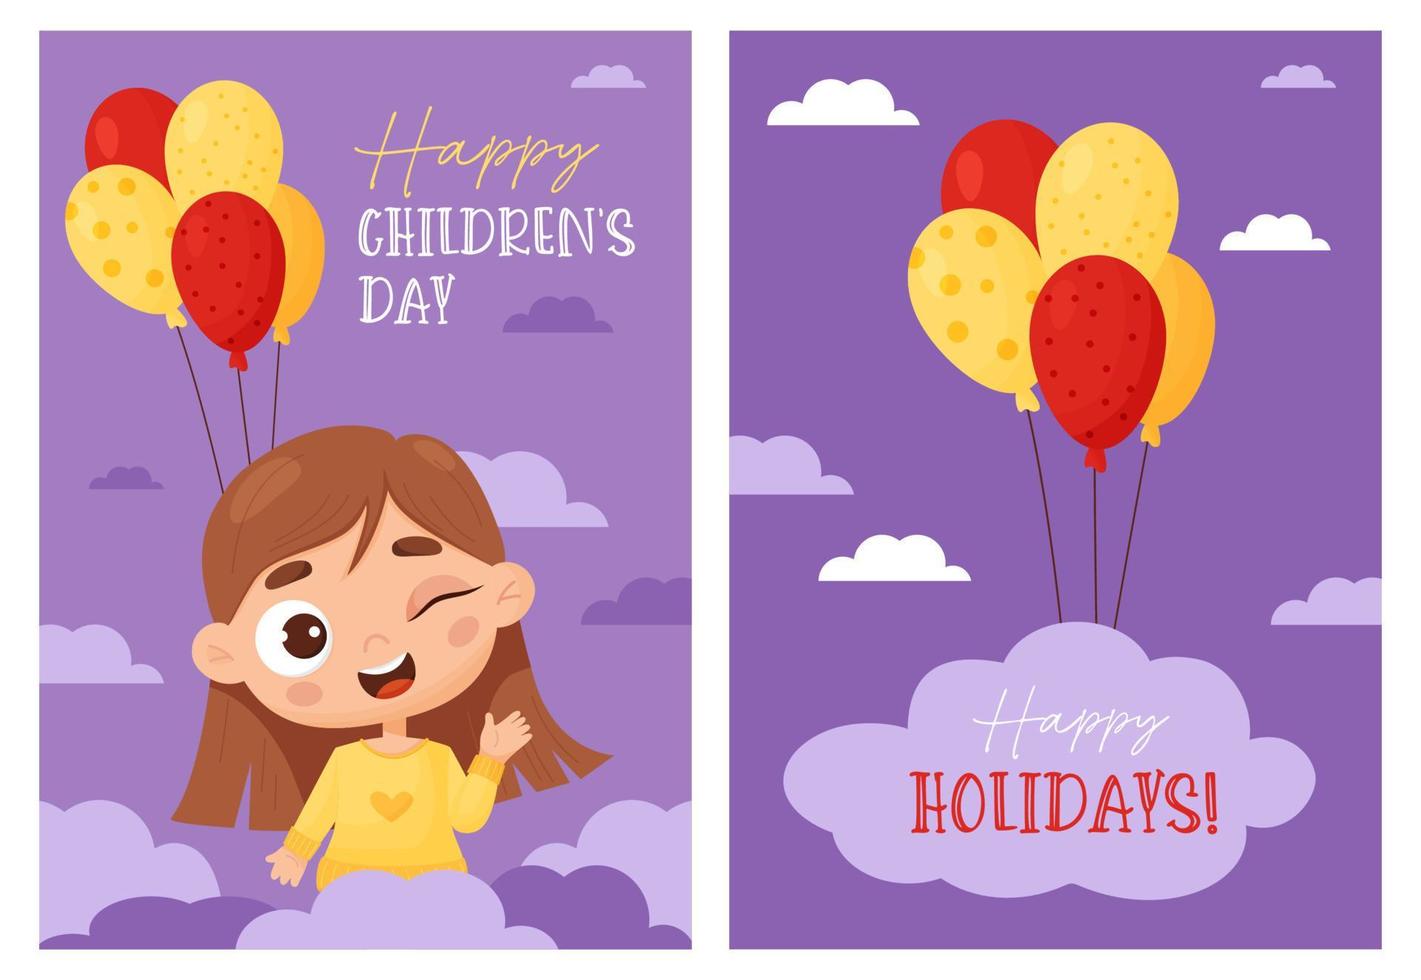 Set holiday cards Happy Childrens Day. Cute winking girl with balloons on purple background. Vector illustration in cartoon style. Vertical template for greeting cards, design, posters, print.